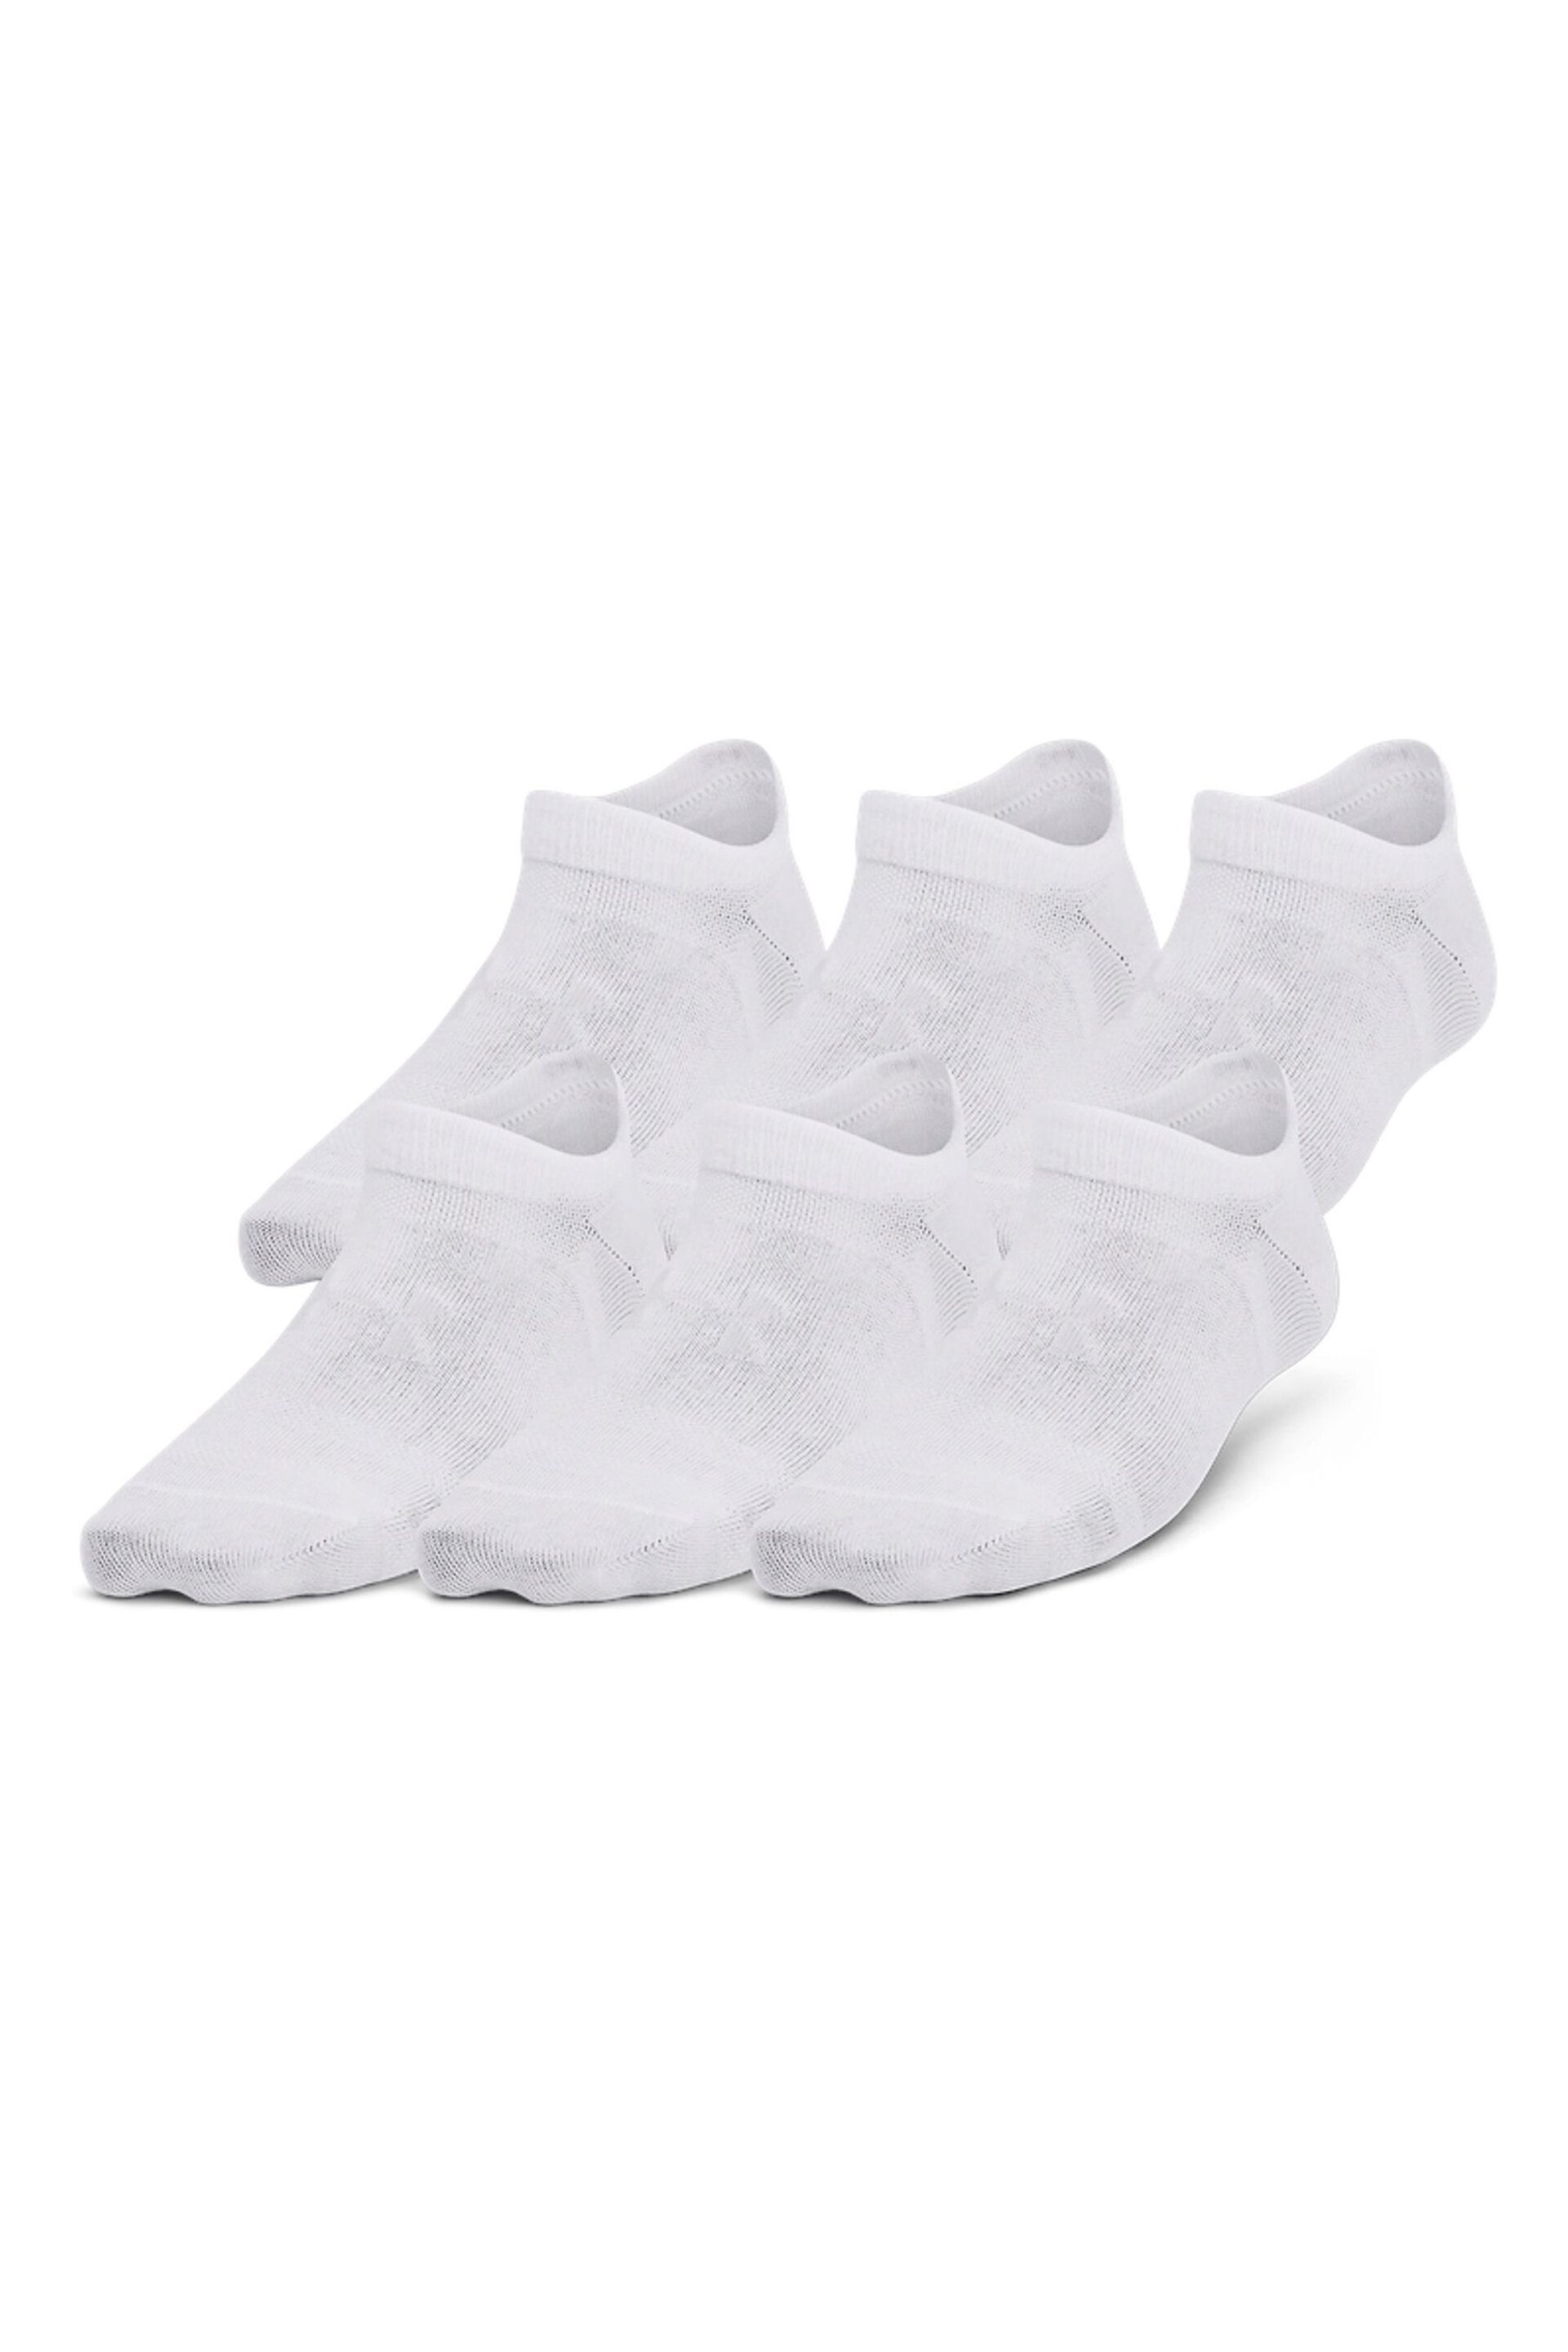 Under Armour Youth Essential No Show White Socks 6 Pack - Image 1 of 4